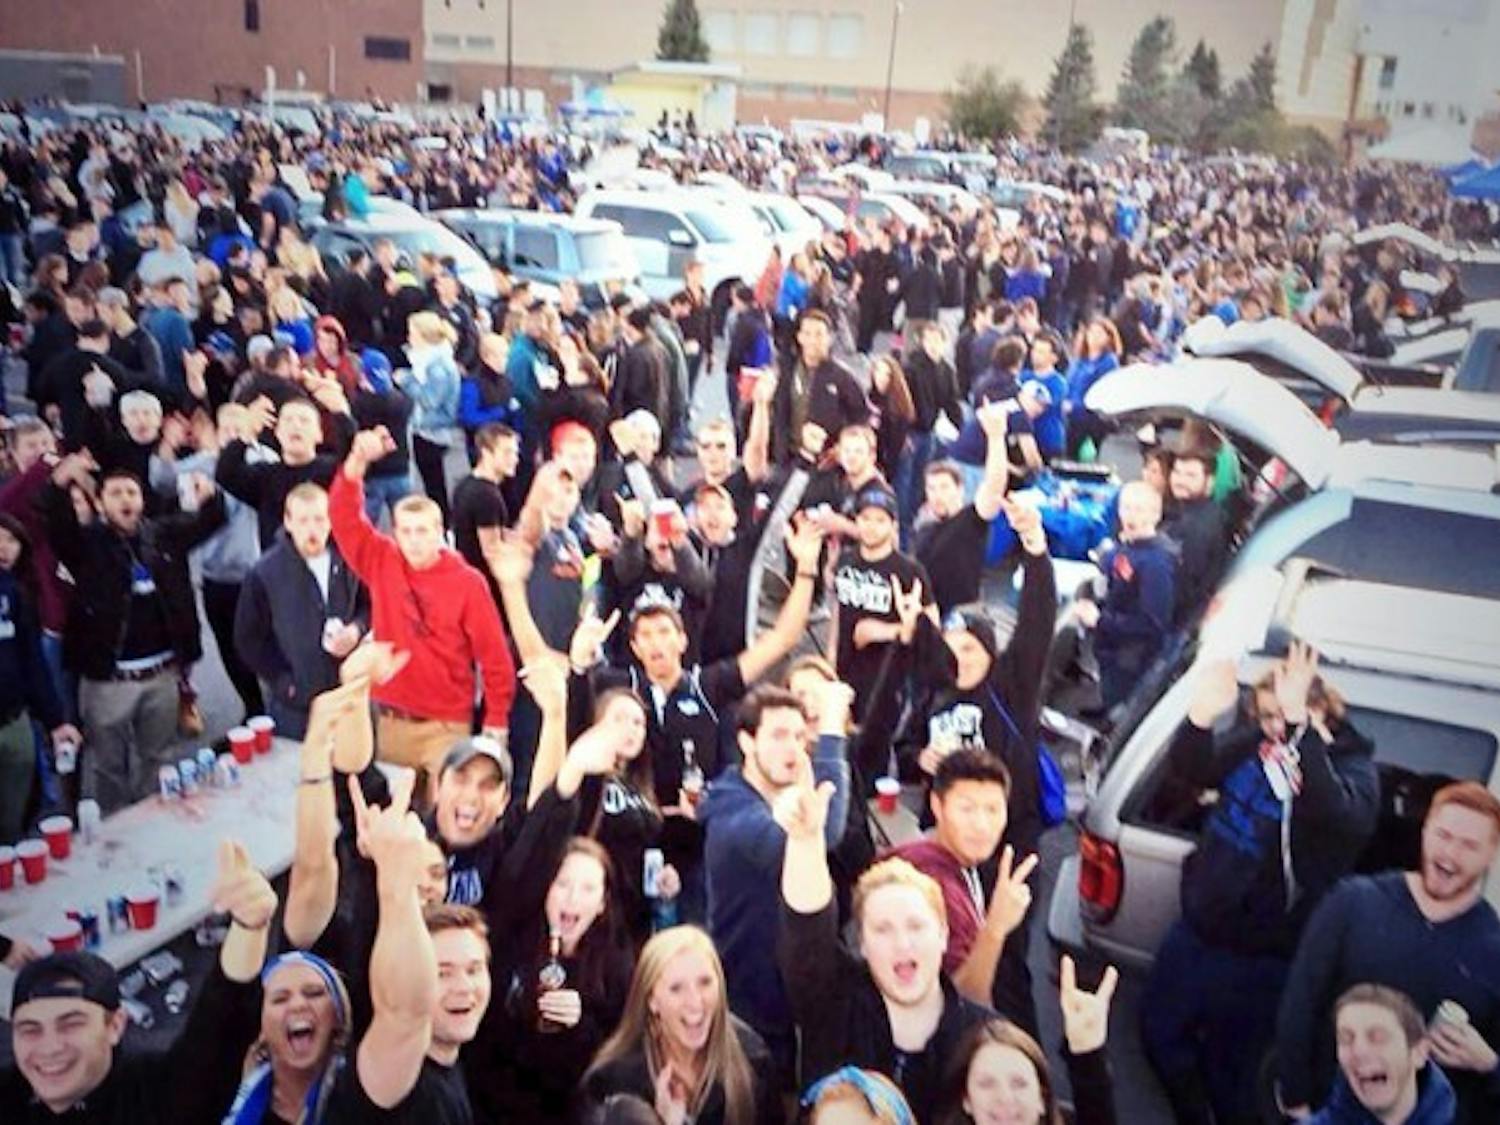 UB Athletics estimated about 5,000 students attended last Friday&rsquo;s
pre-football game tailgate, prompting more security and staff
for future tailgates. Courtesy of Bel Pavlik